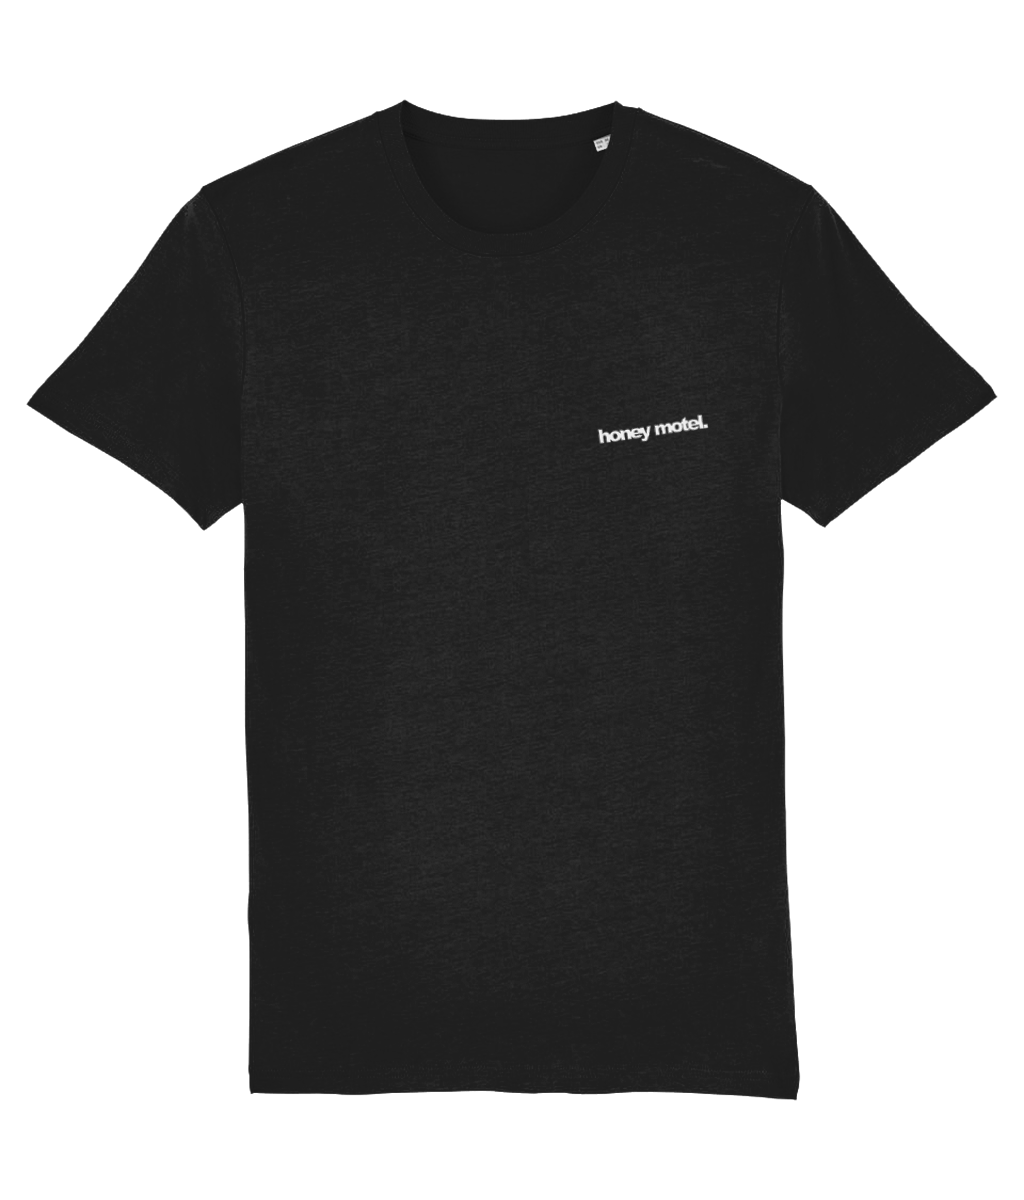 synth hand tee - black.